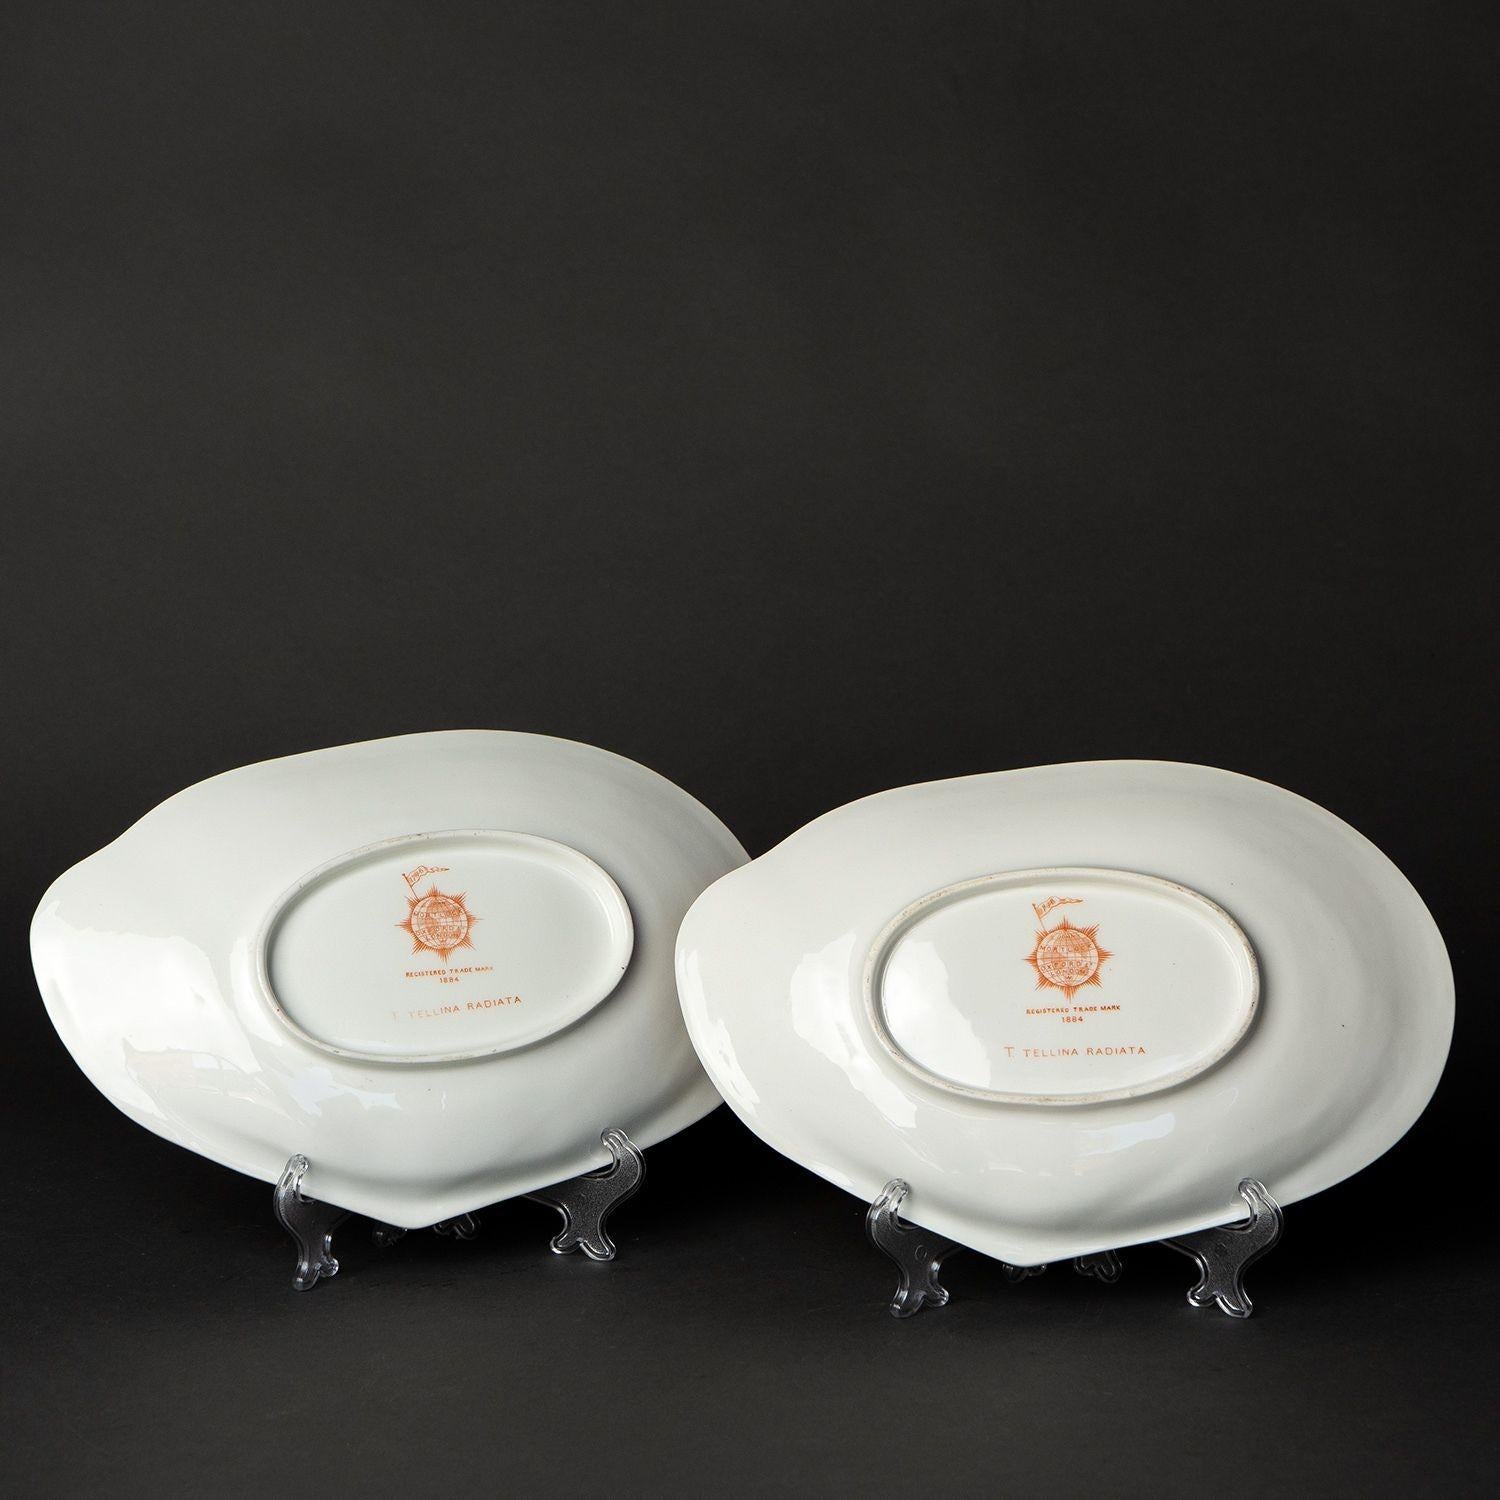 Pink Porcelain 'Nautilus' Dessert Service by Wedgwood for John Mortlock, 1880s For Sale 7